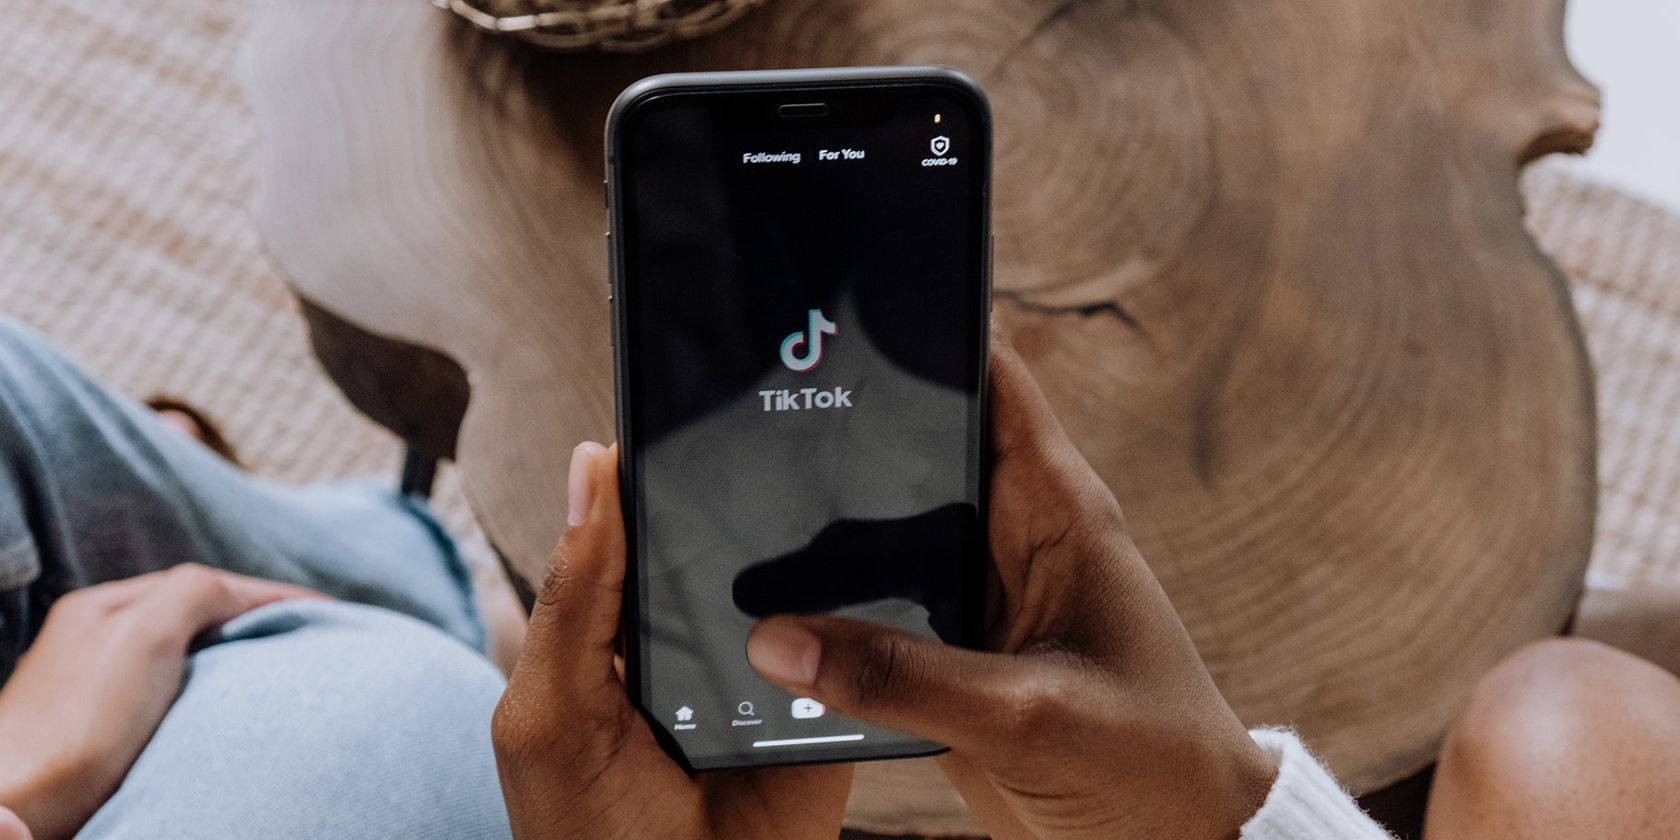 How to Use TikTok: 11 Tips for Beginners